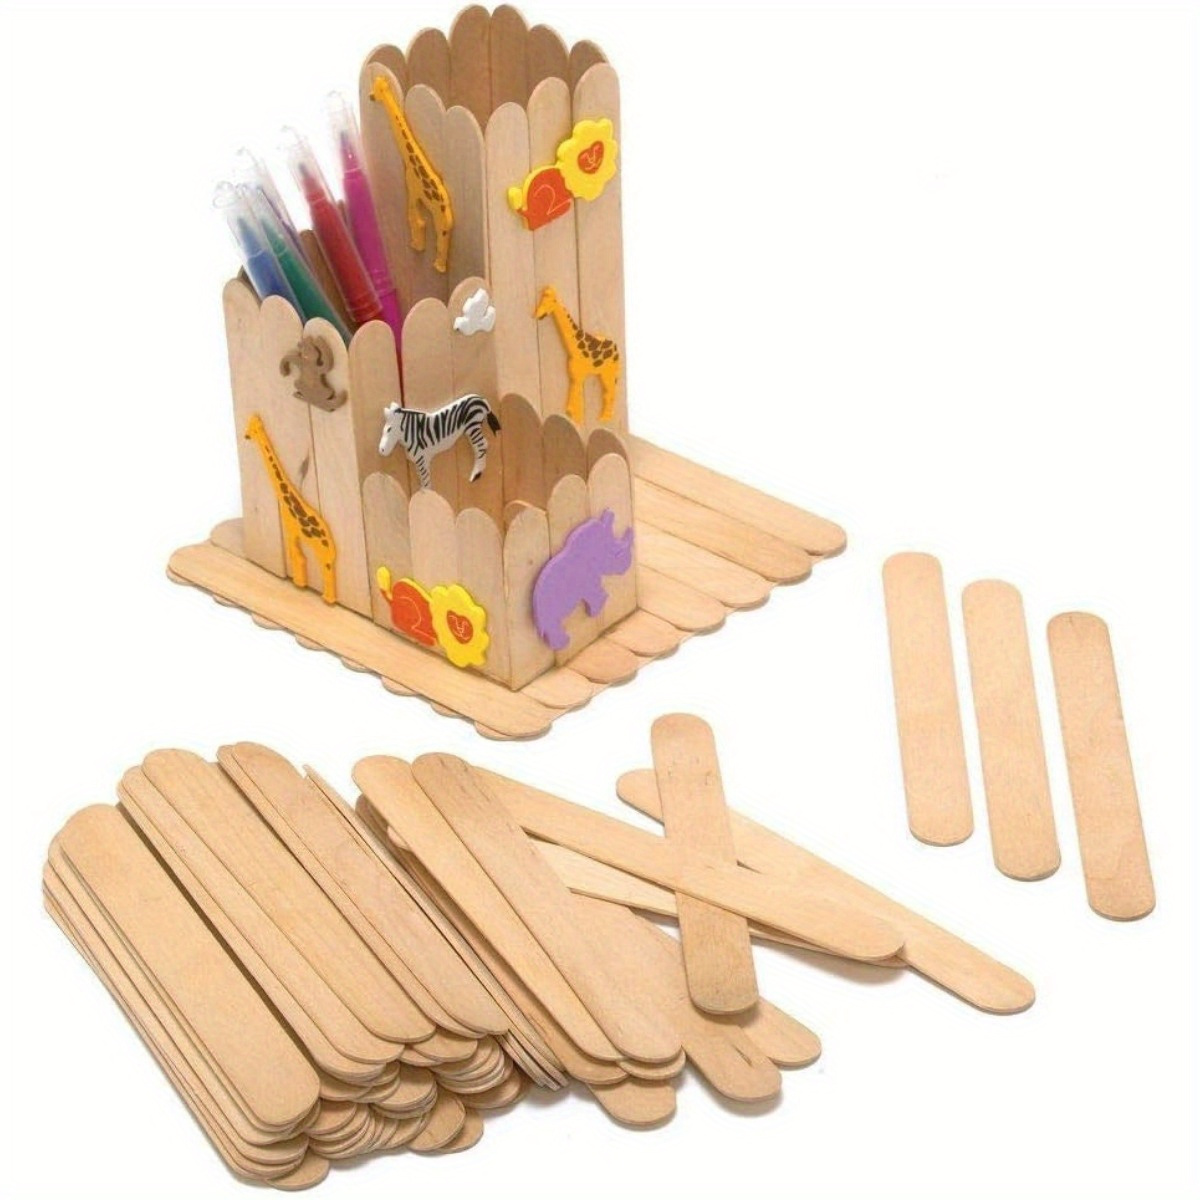  Didiseaon 300 PCS healies DIY Crafts Scout Crafts Stacking Toys  Jumbo Lollipop Popsicle Sticks for Food Wood Craft Sticks self Made ice  Cream Stick Paint Wood Carving Child Materials : Arts